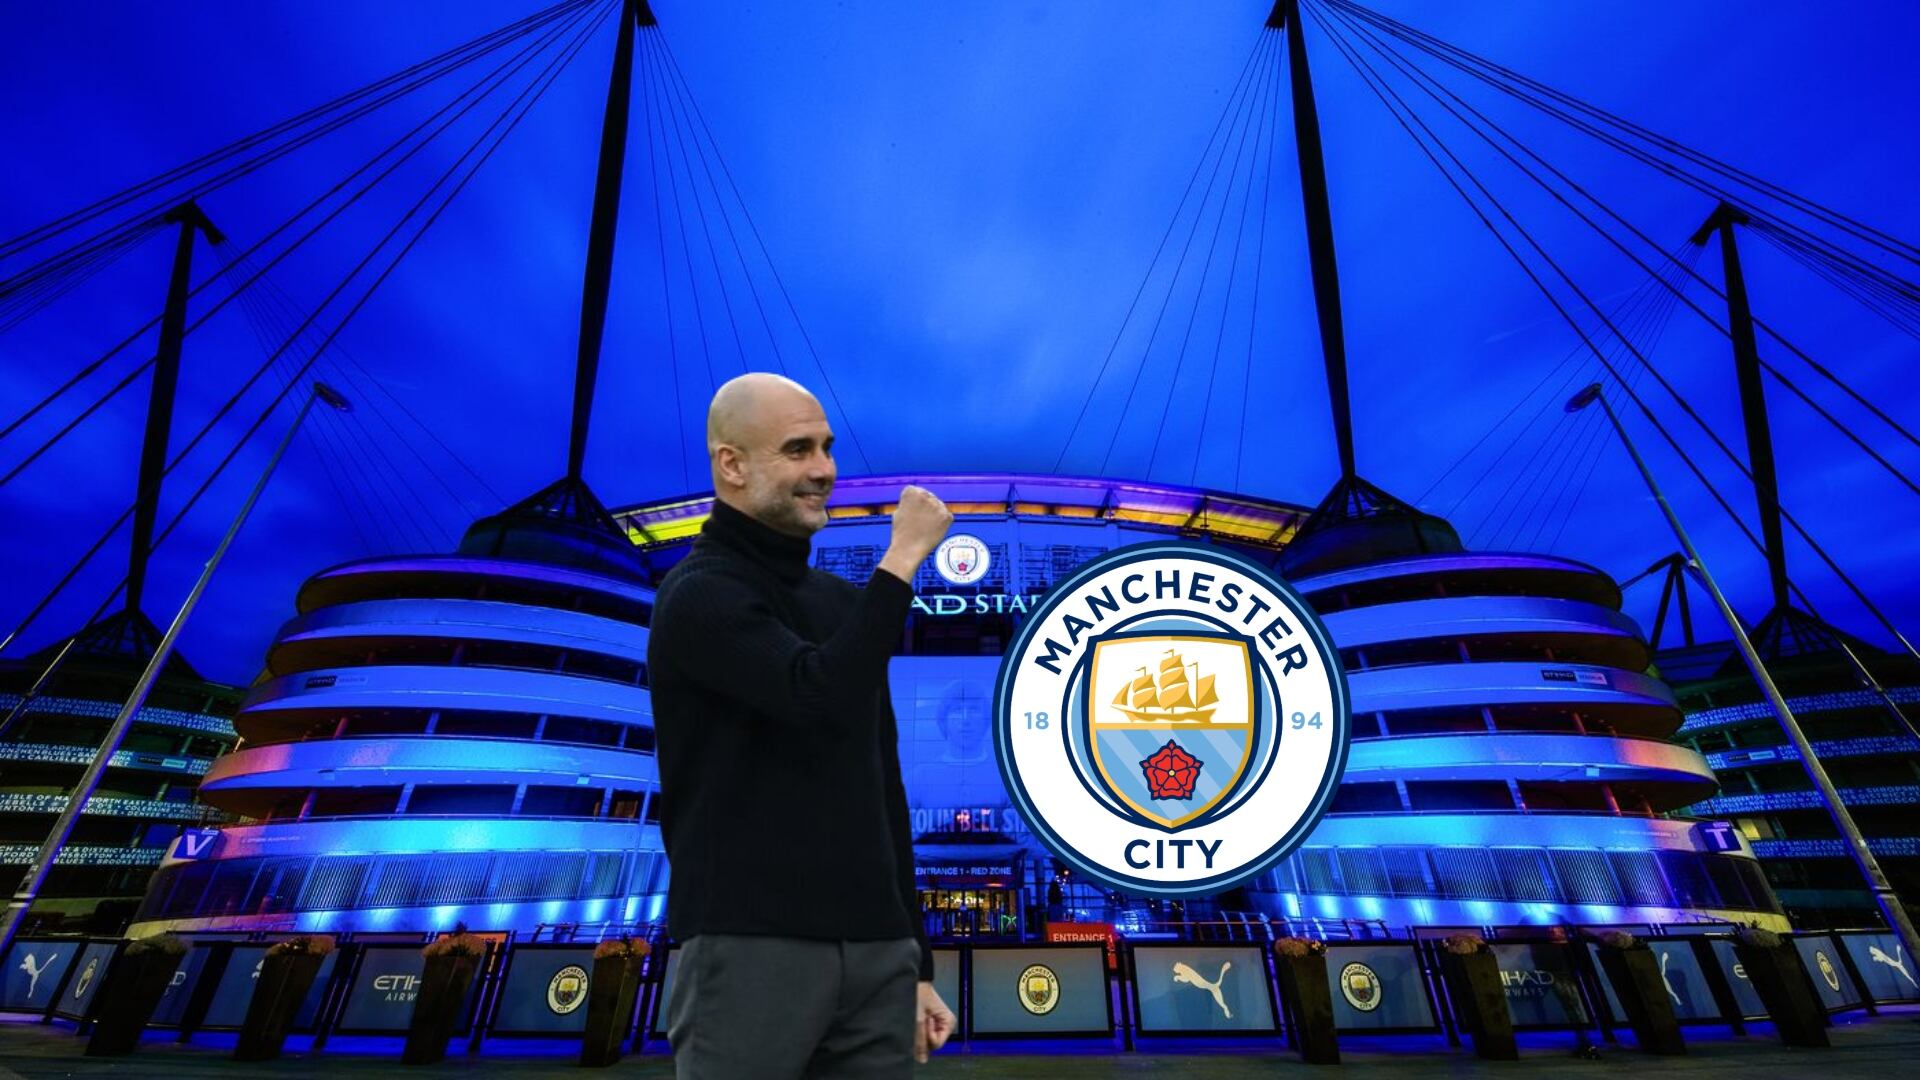 Bye Manchester City, Guardiola reveals his future and the club he would go after City